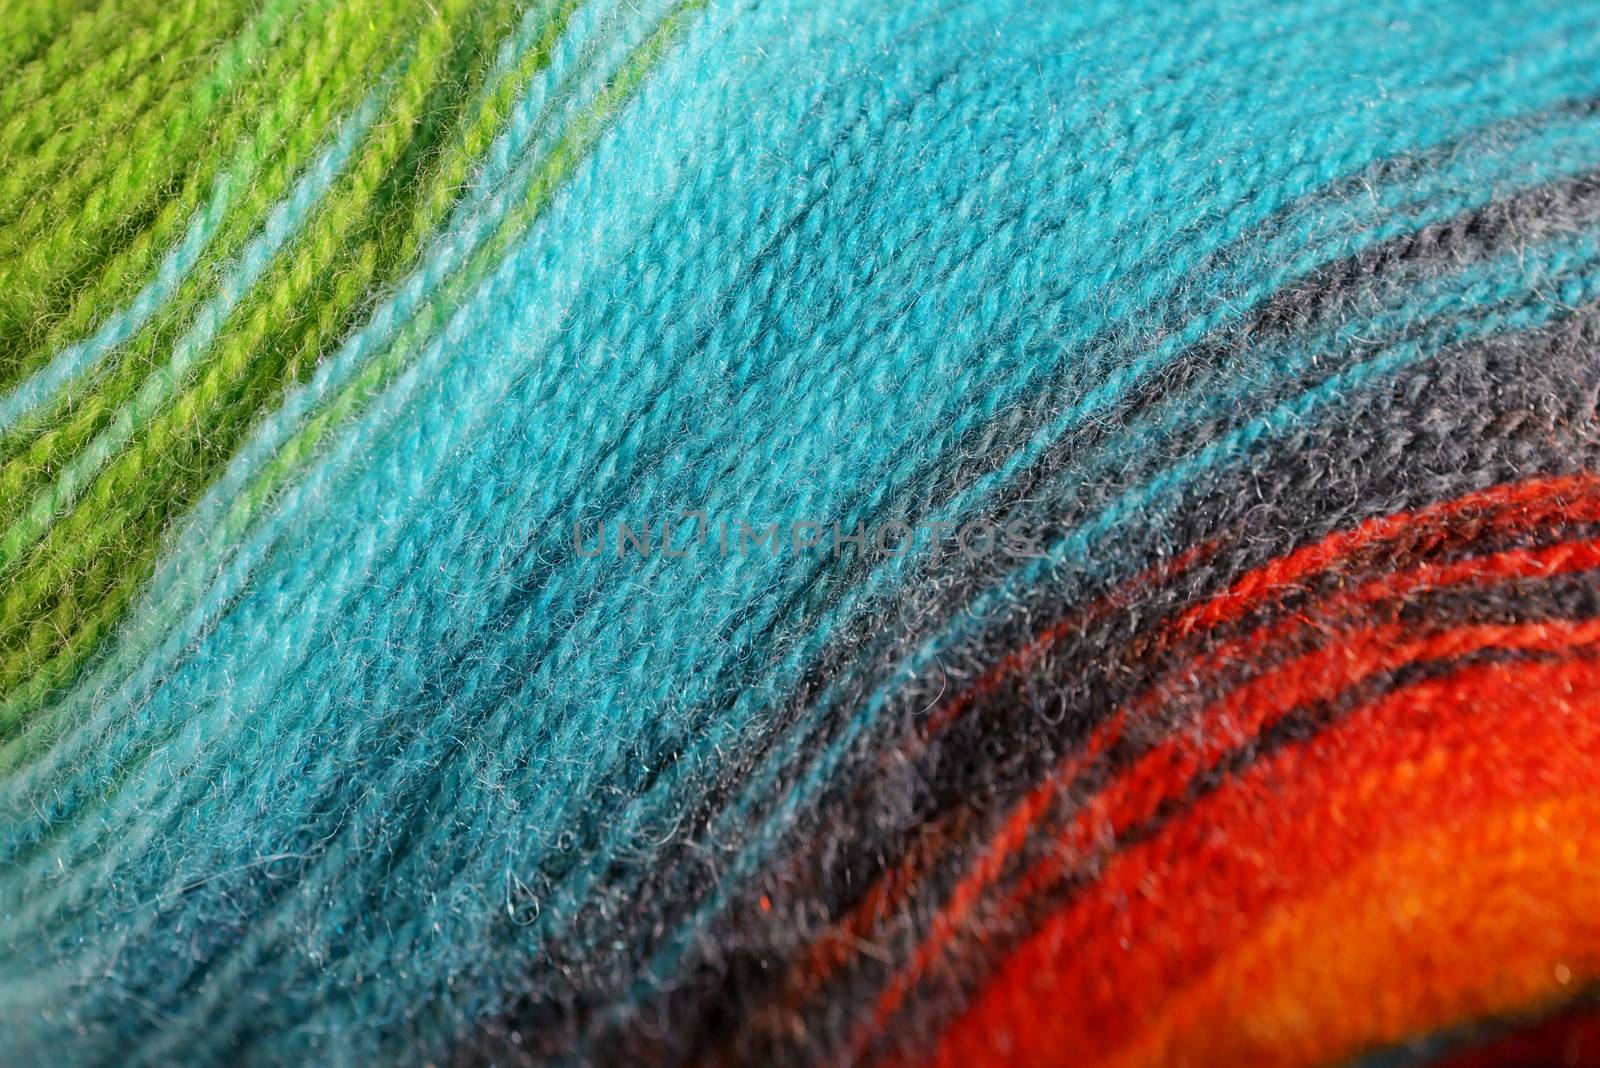 Colorful knitting wool details by mady70